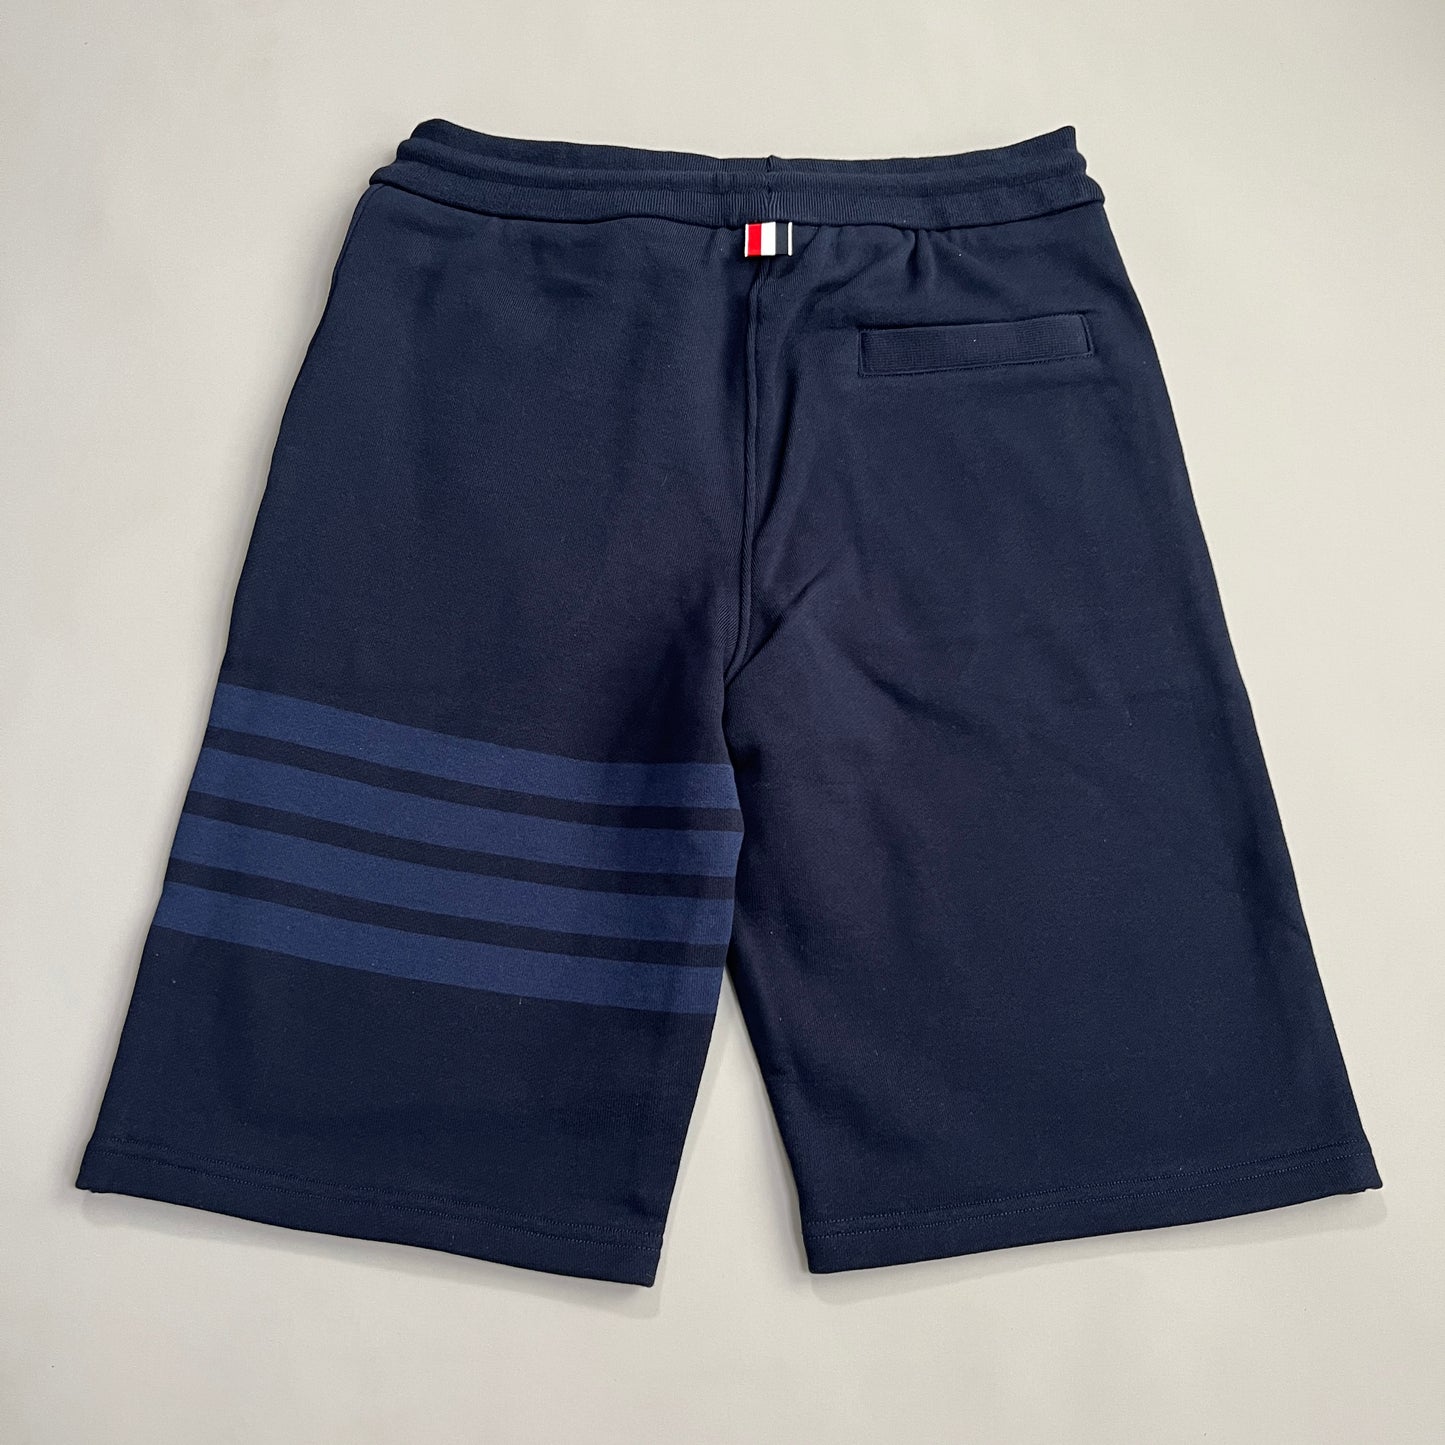 THOM BROWNE Classic Sweat Shorts in Tonal 4 Bar Loop Back Navy Size 0 (New)